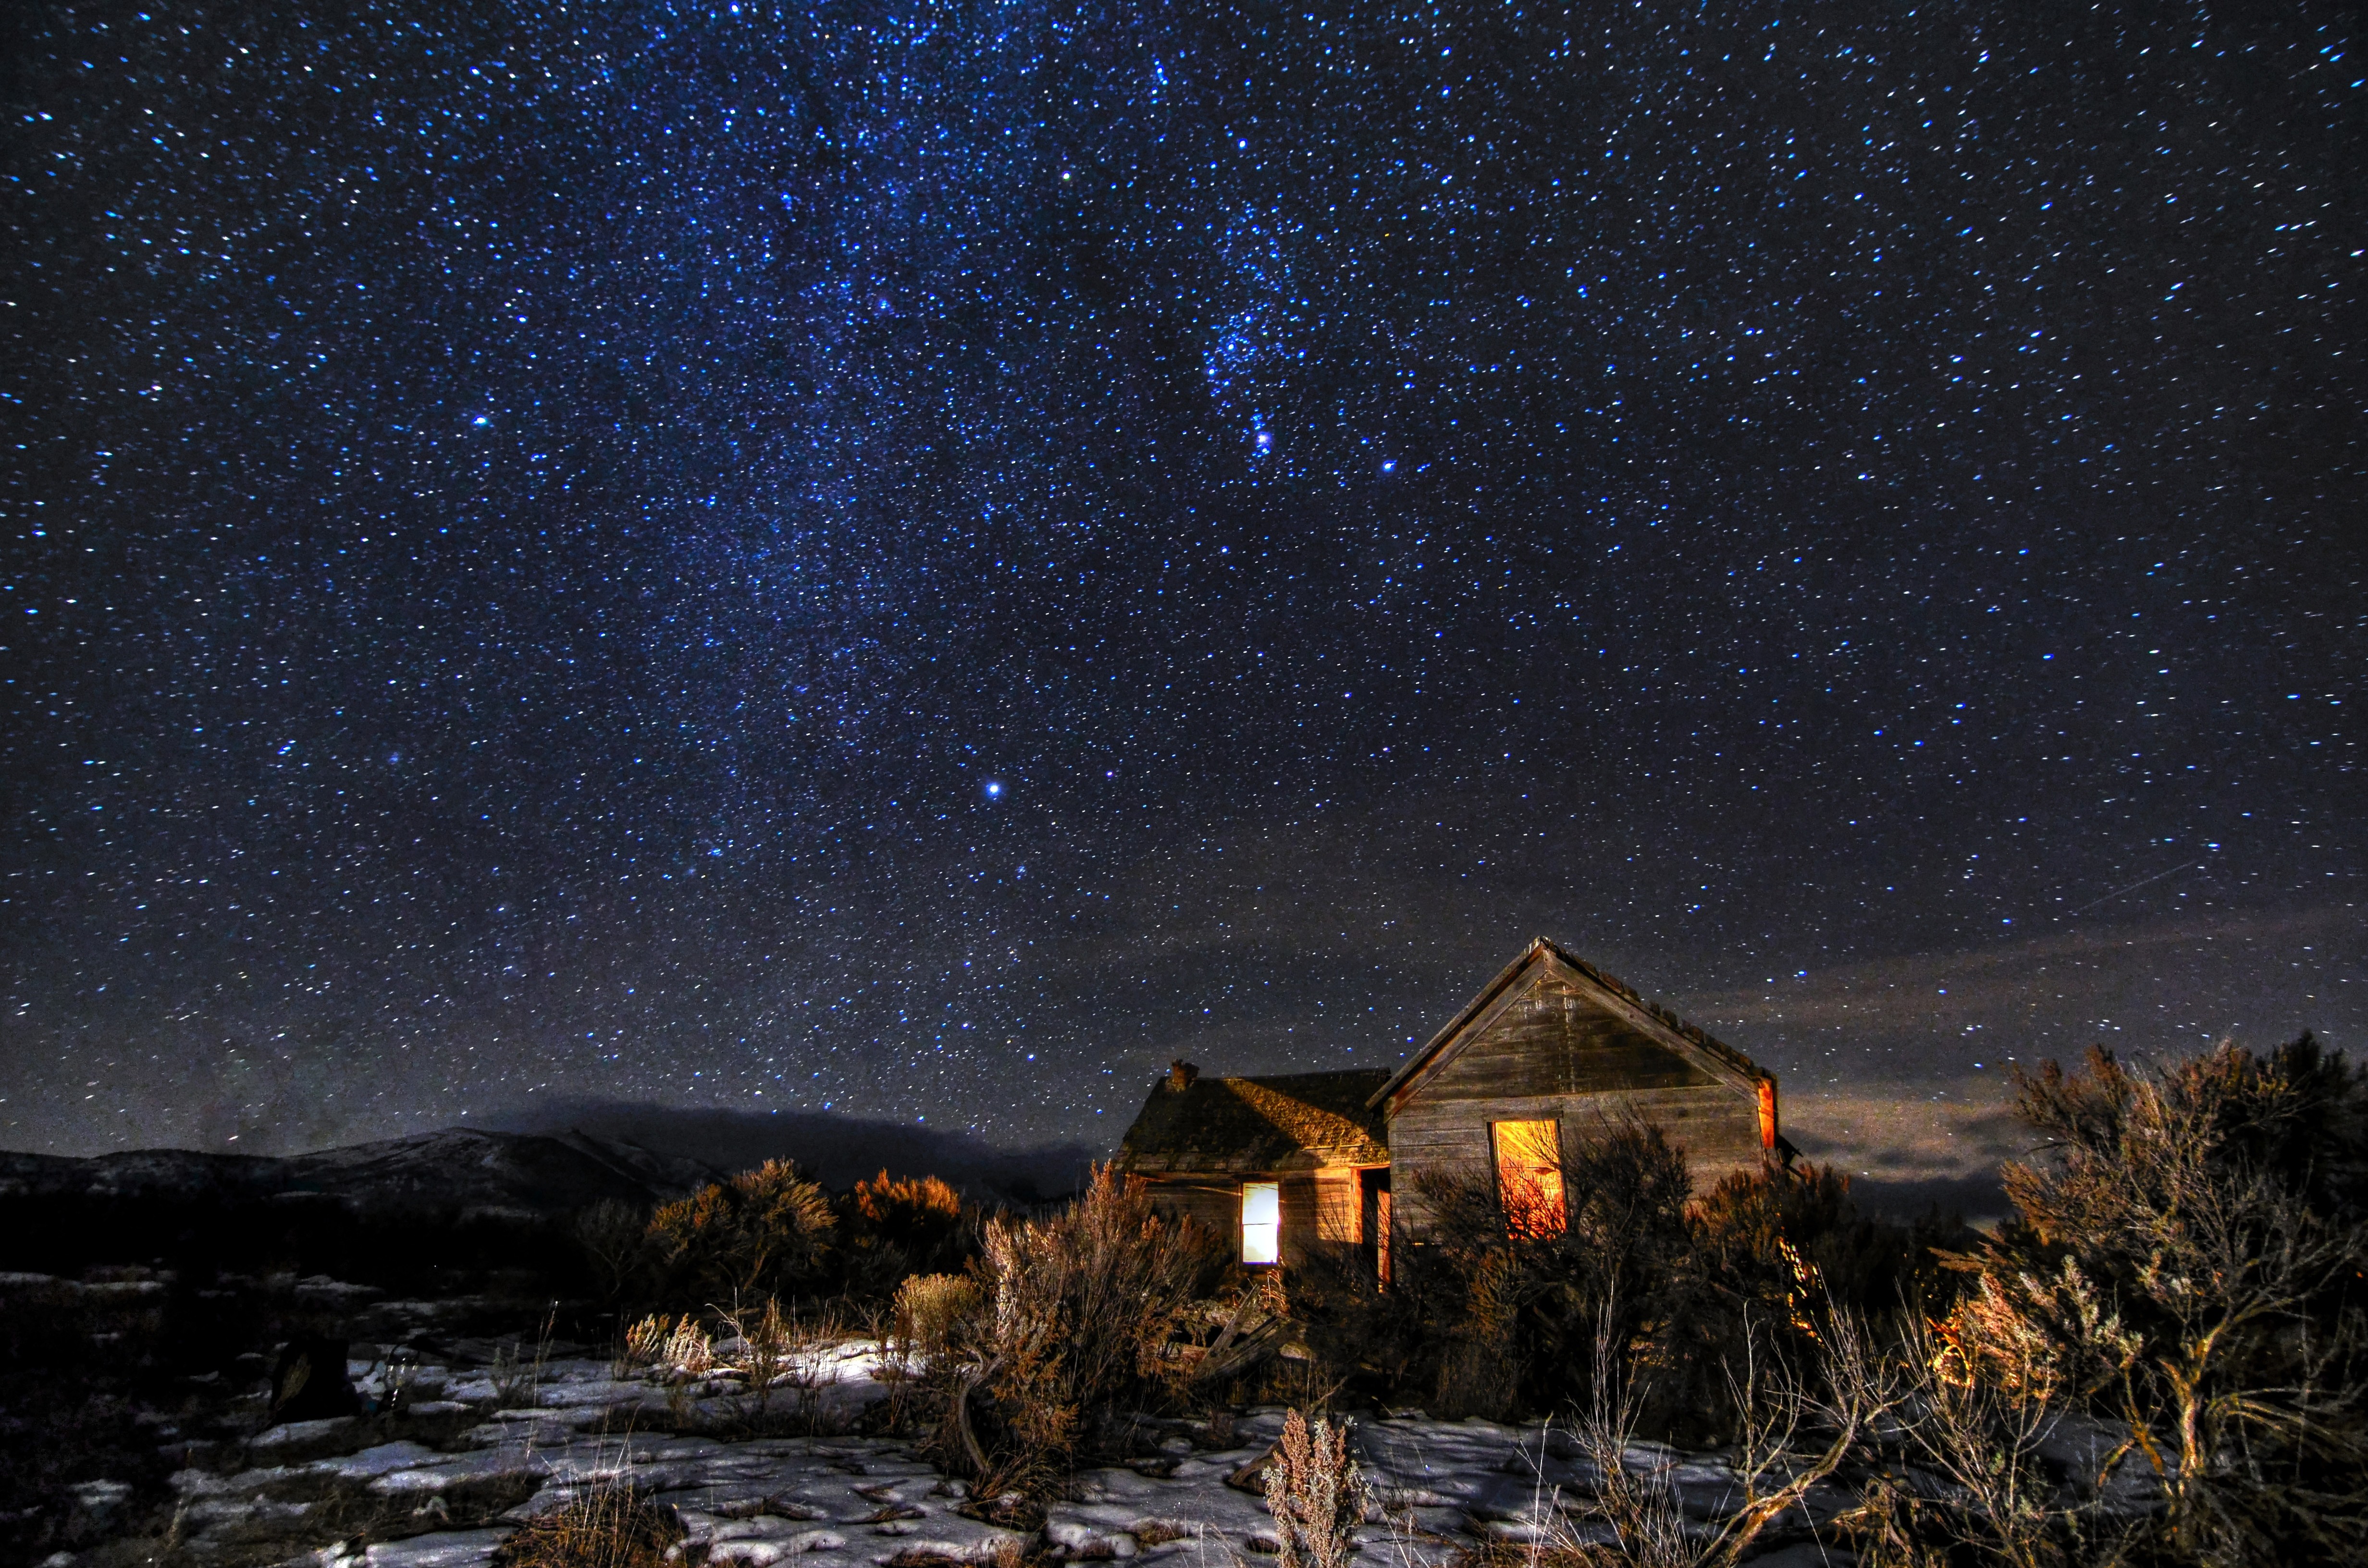 General 4928x3264 stars snow night house abandoned sky low light